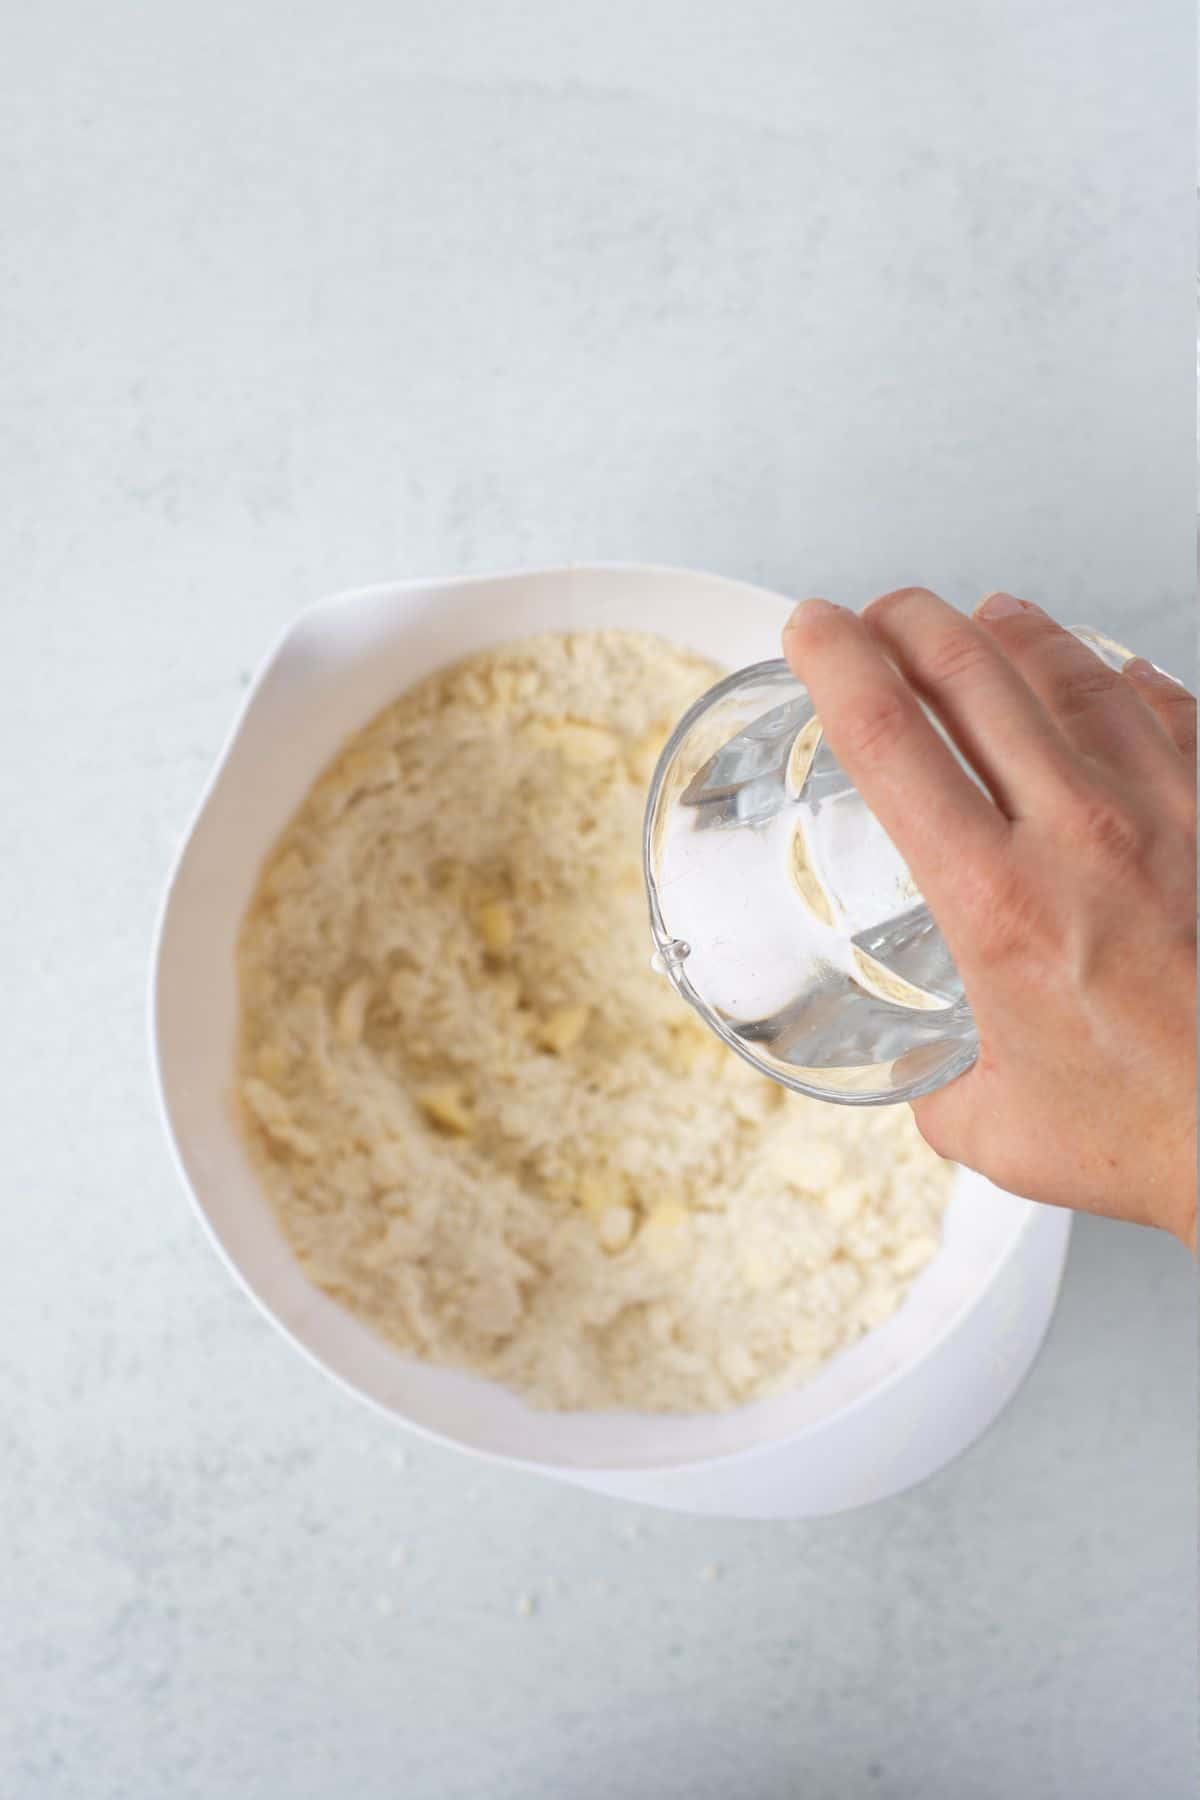 adding water to dough.